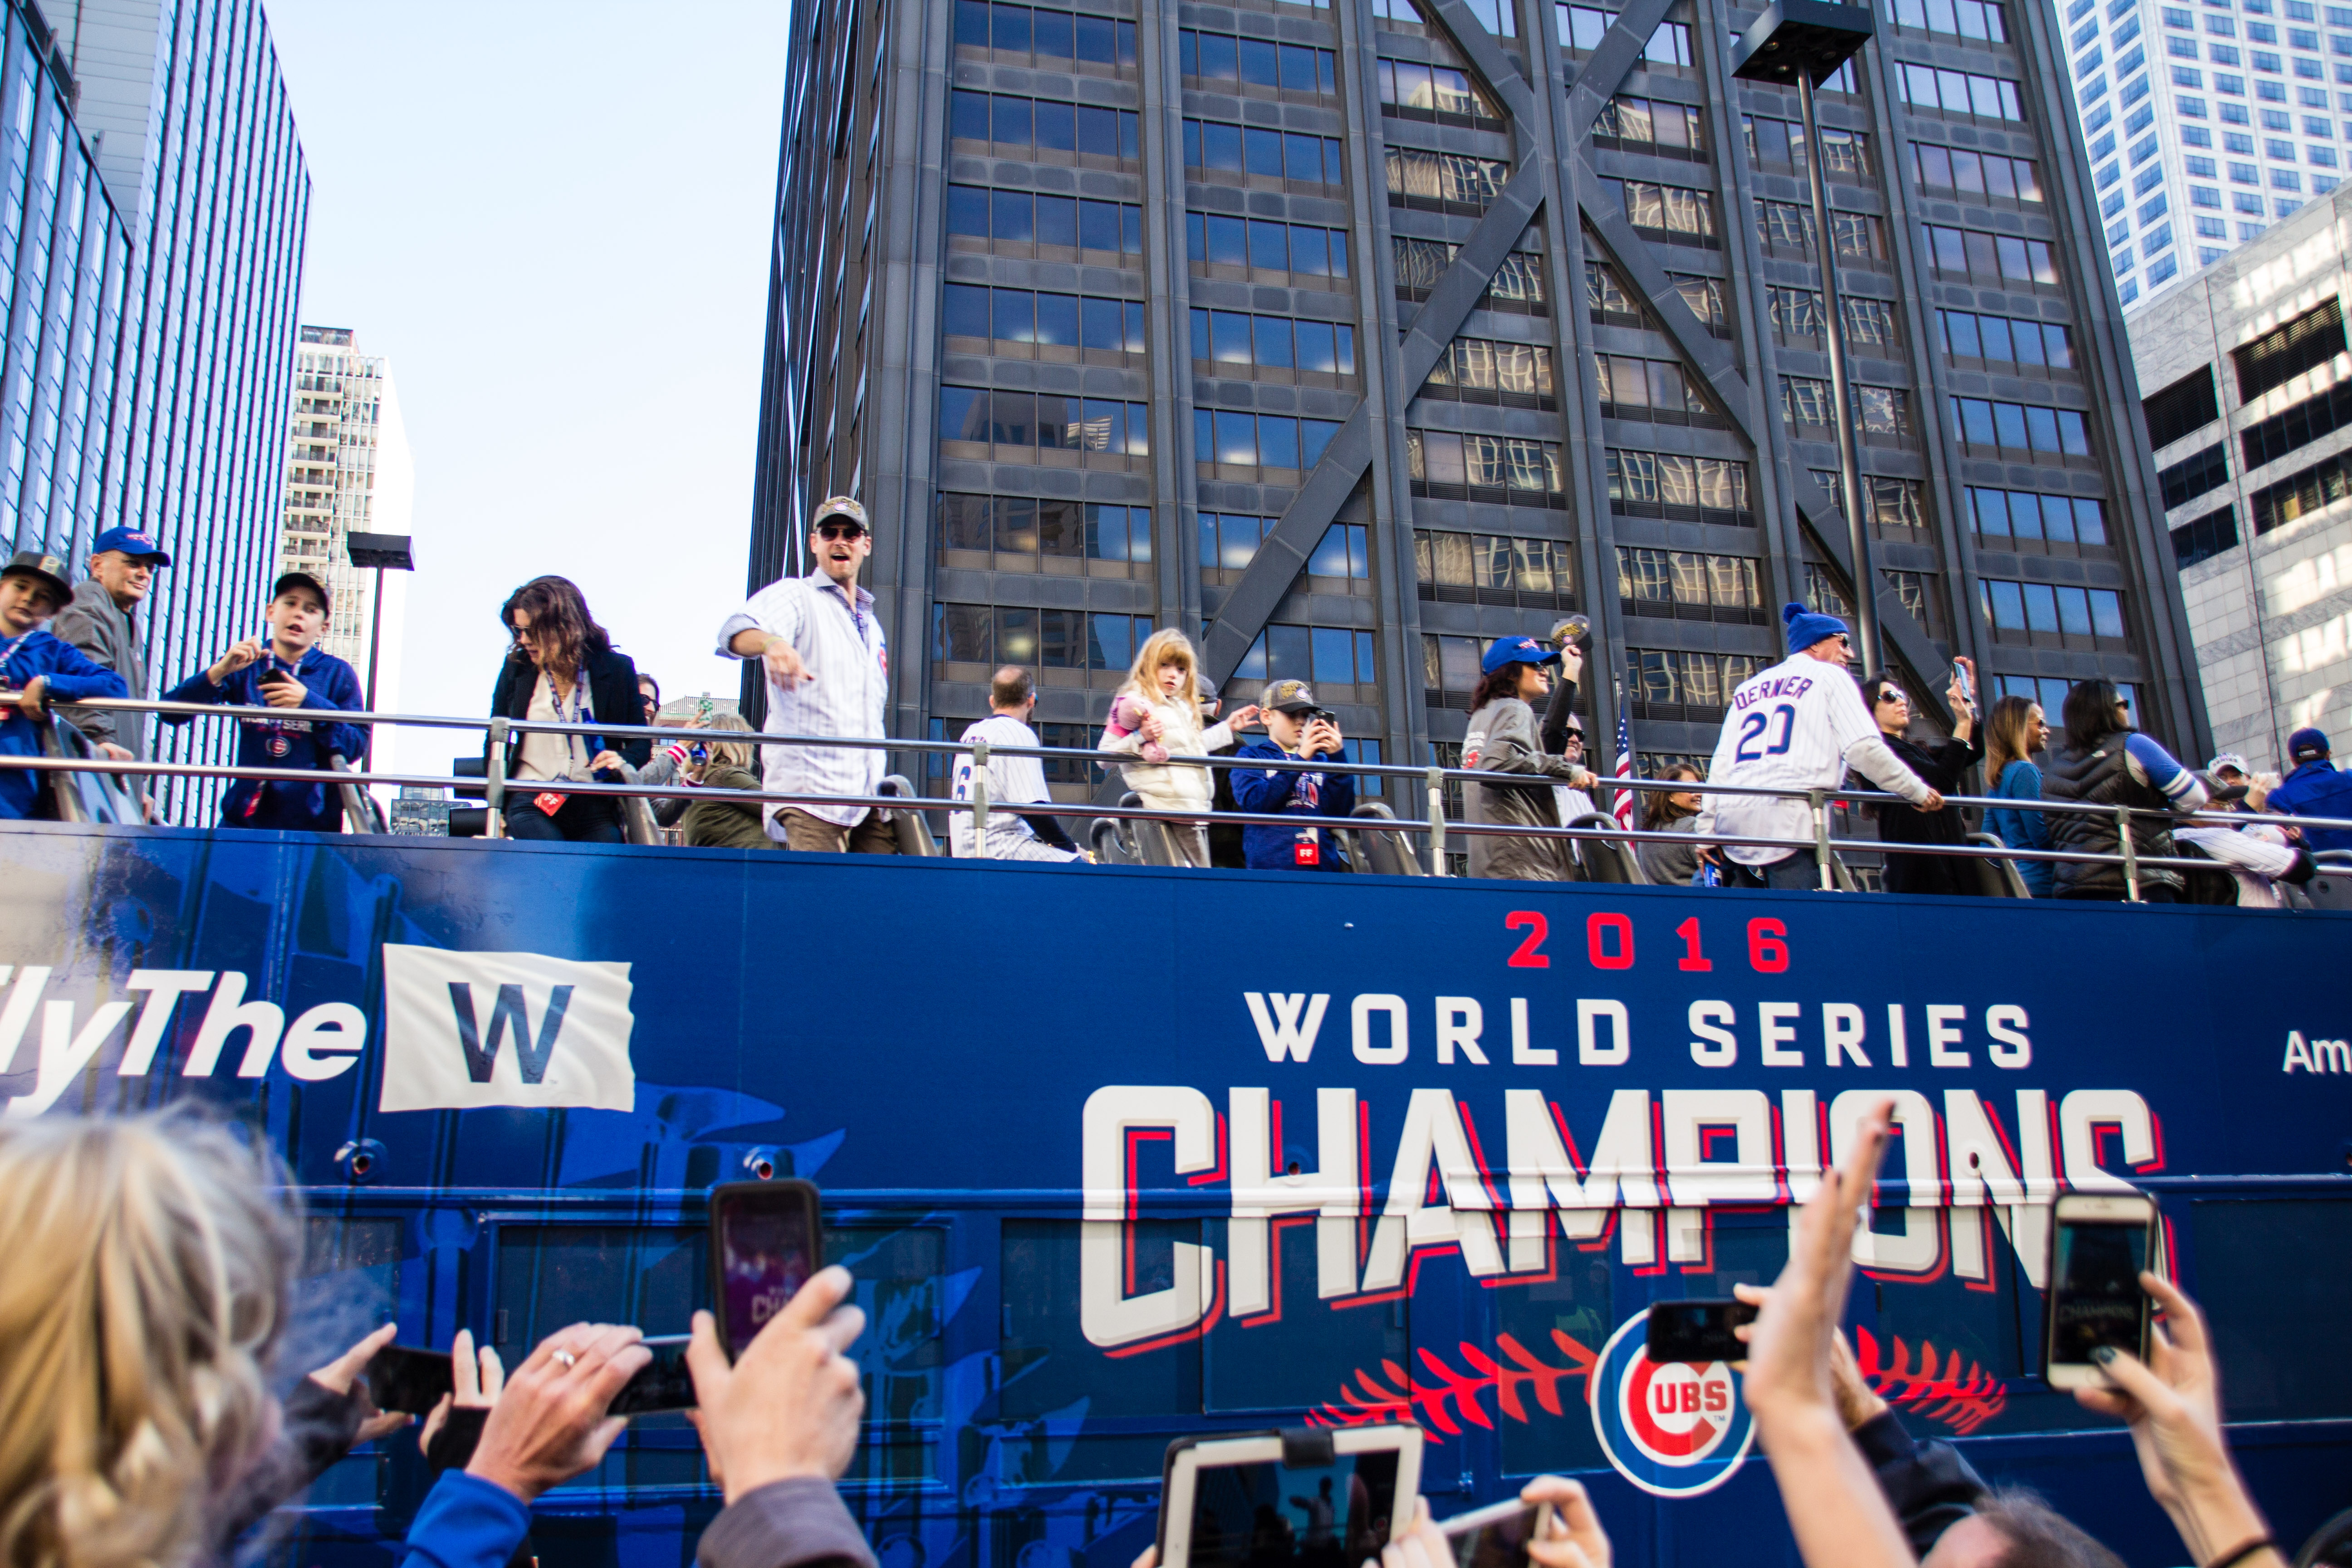 File:Cubs World Series Victory Parade (30477619320).jpg - Wikimedia Commons